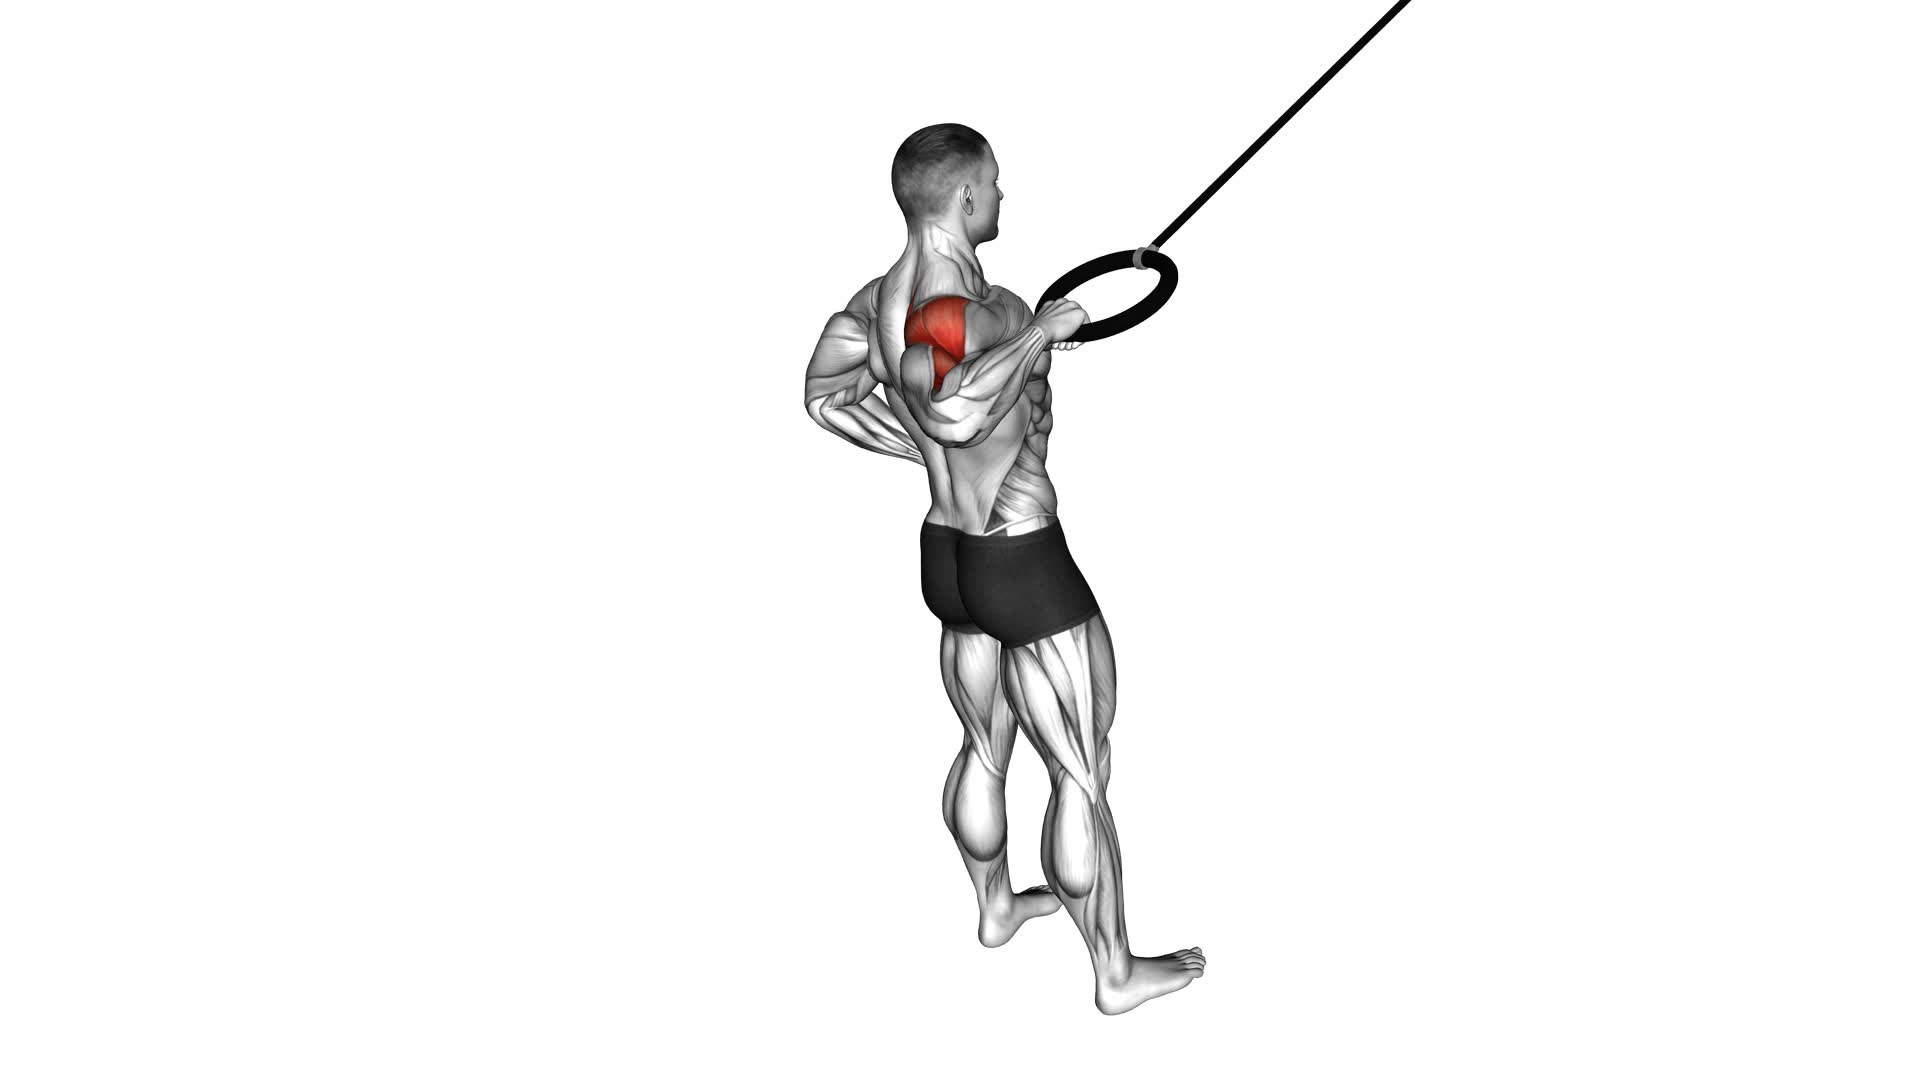 Ring Single Arm Rear Delt Row (male) - Video Exercise Guide & Tips